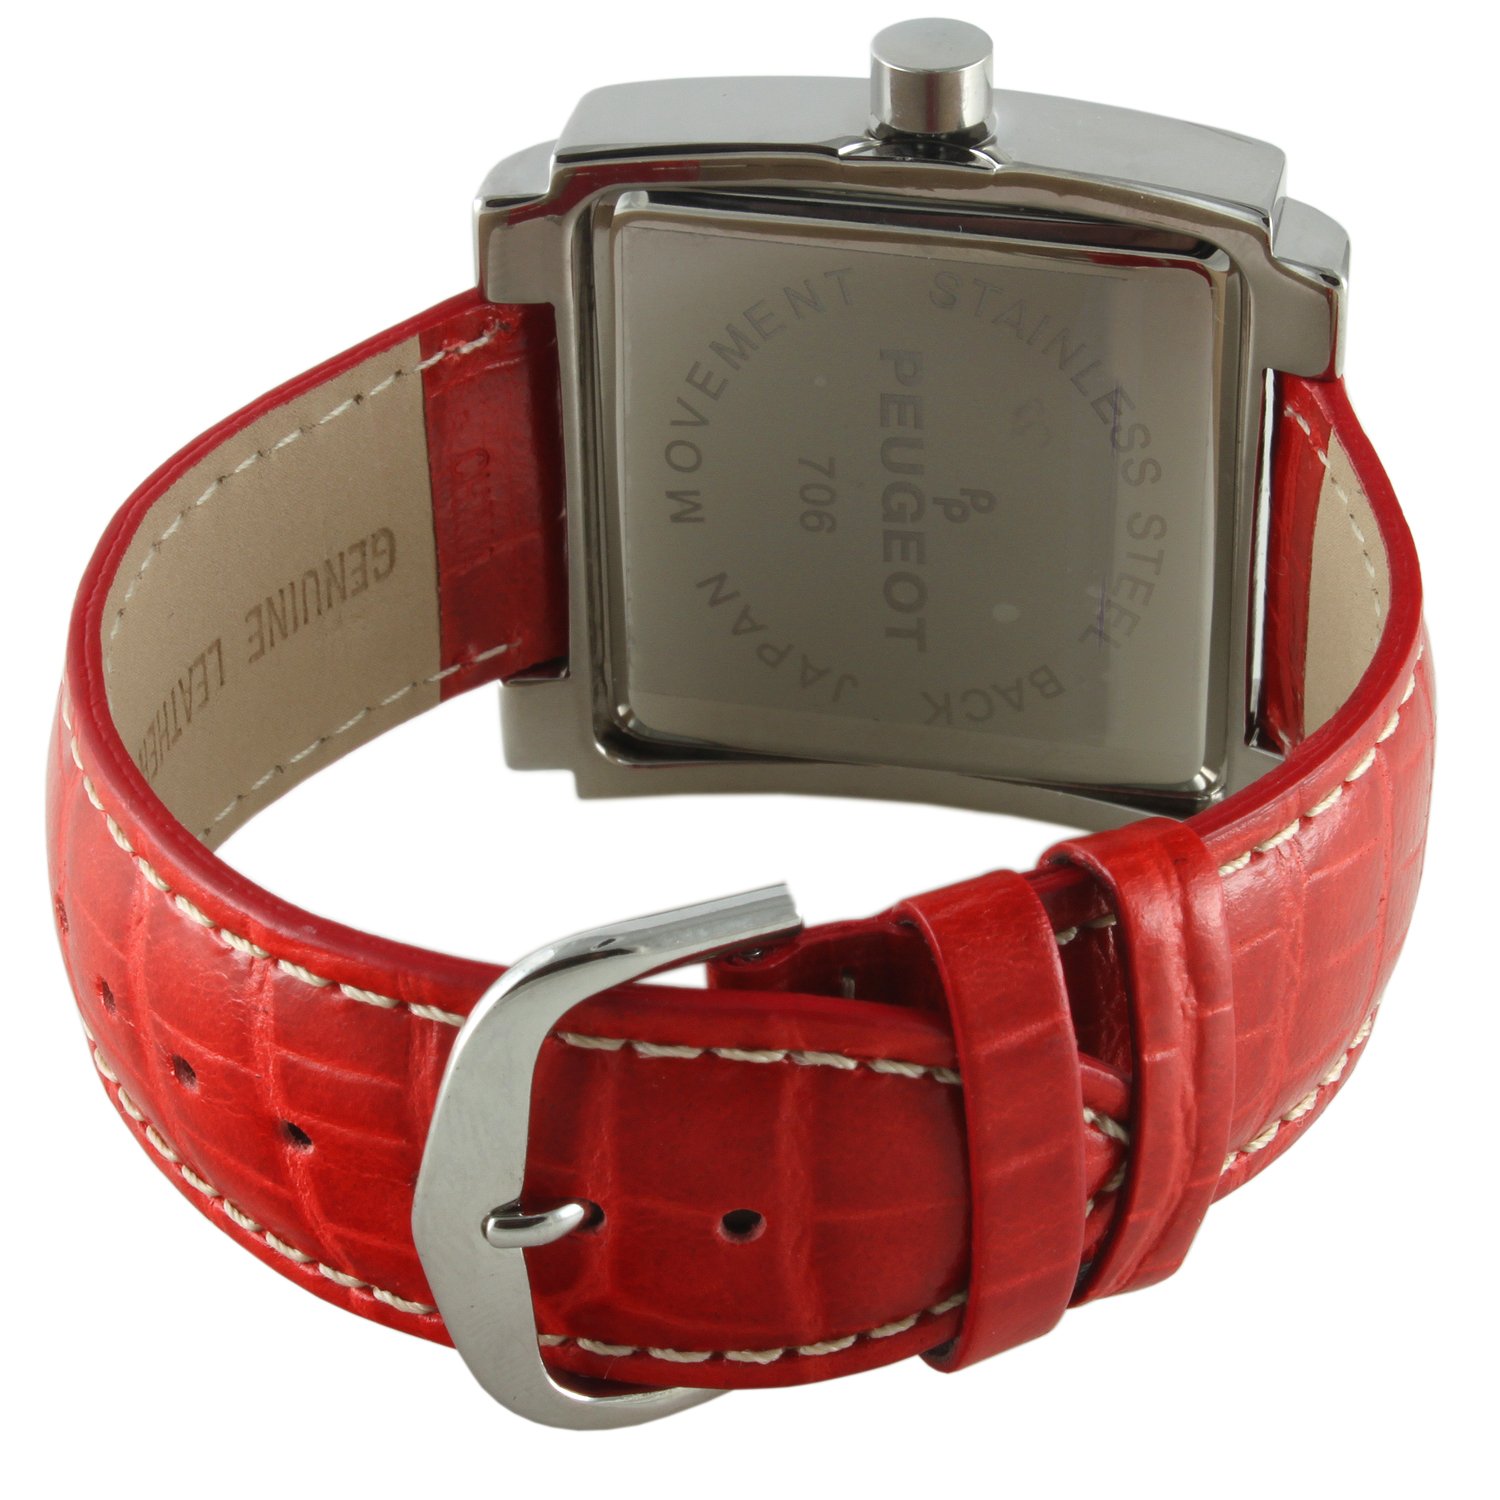 Peugeot Women's Leather Easy Read Big Face Watch